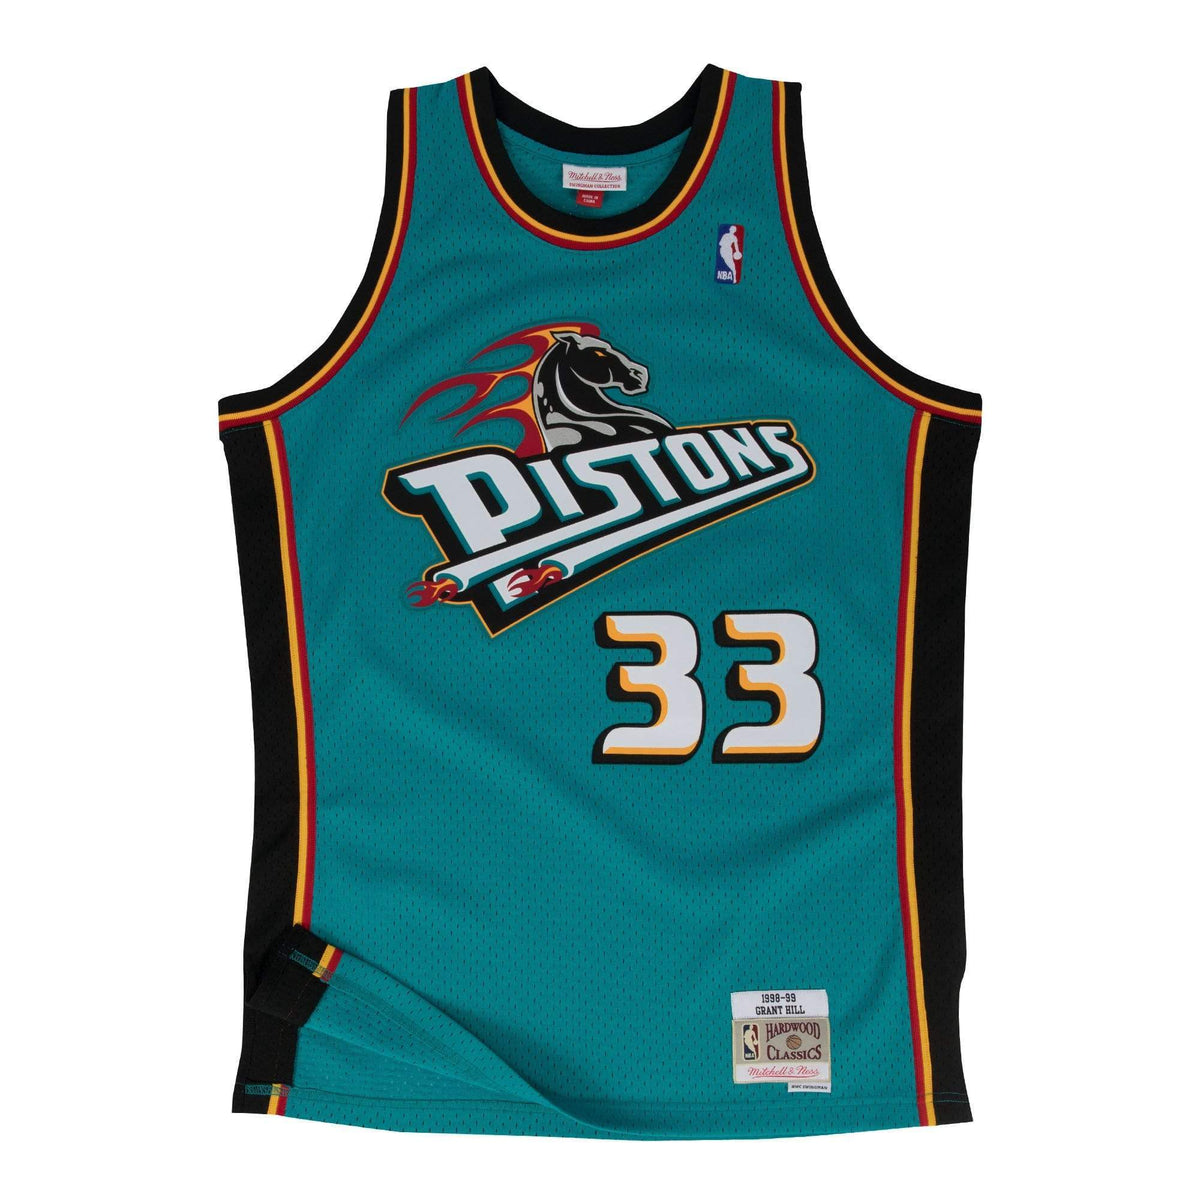 Grant Hill Vintage Nike Authentic Basketball Jersey